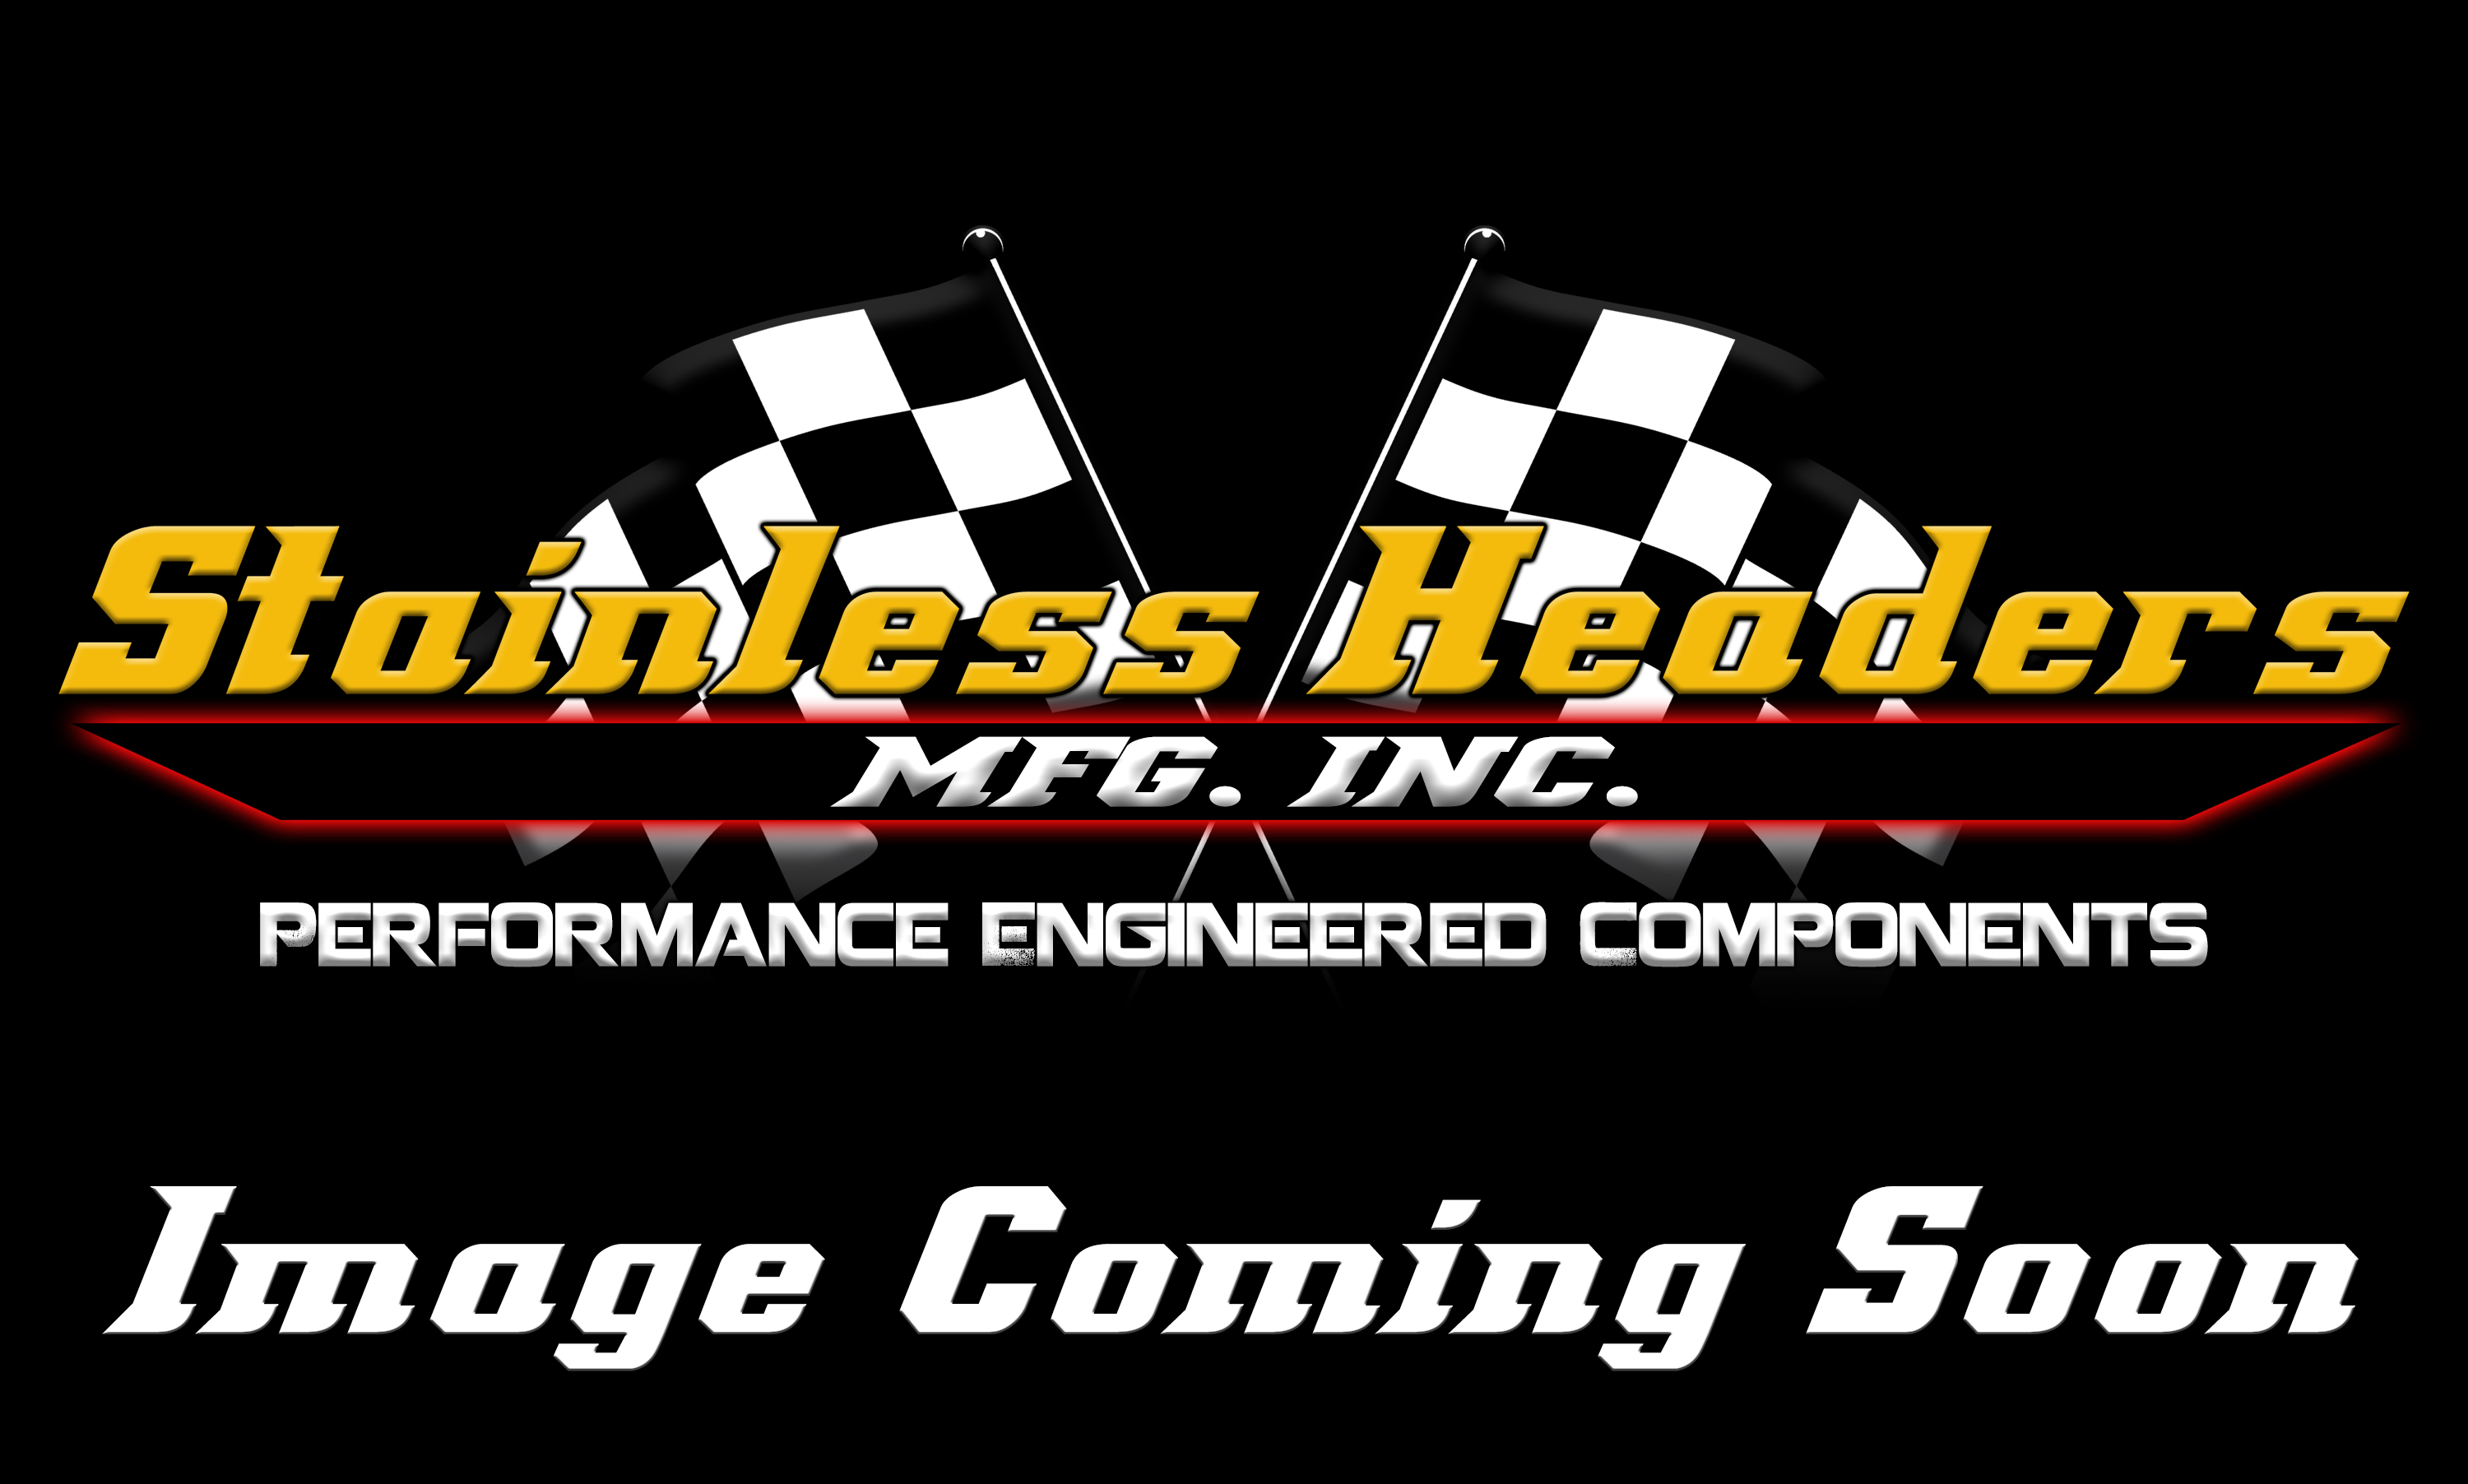 Stainless Headers - 18 Degree Small Block Chevy Turbo Manifold Build Kit - Image 4